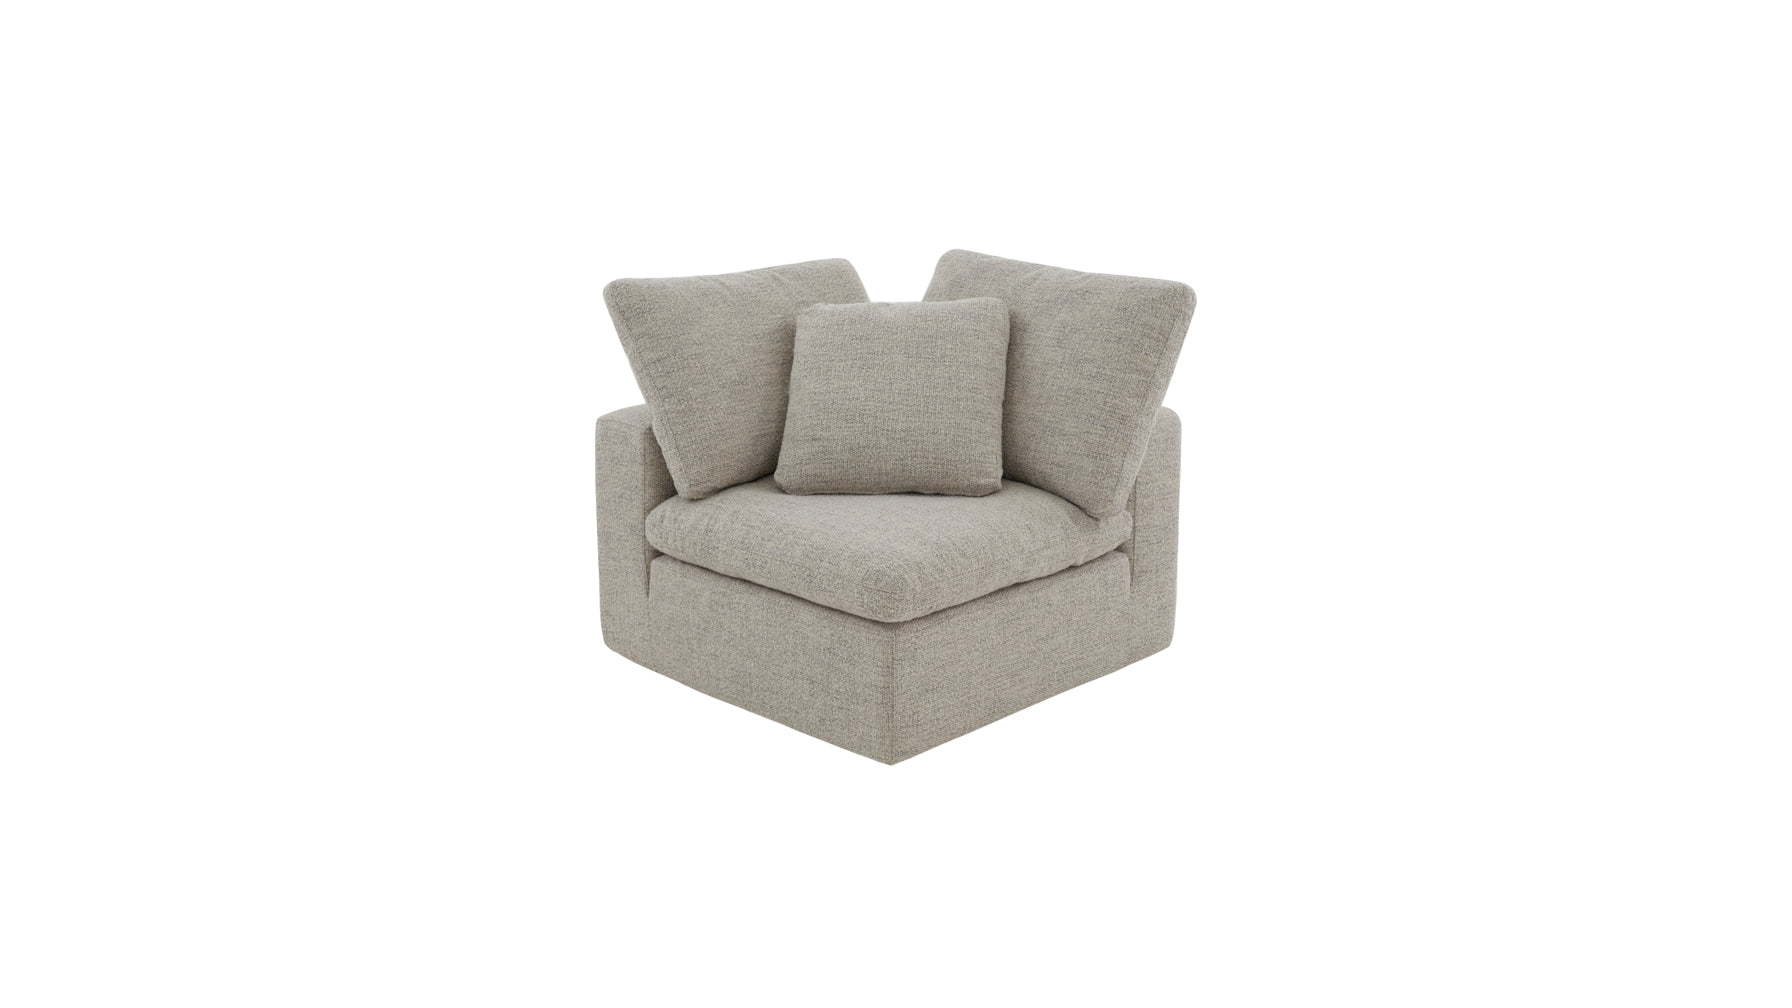 Movie Night™ Corner Chair, Large, Oatmeal (Left Or Right) - Image 3